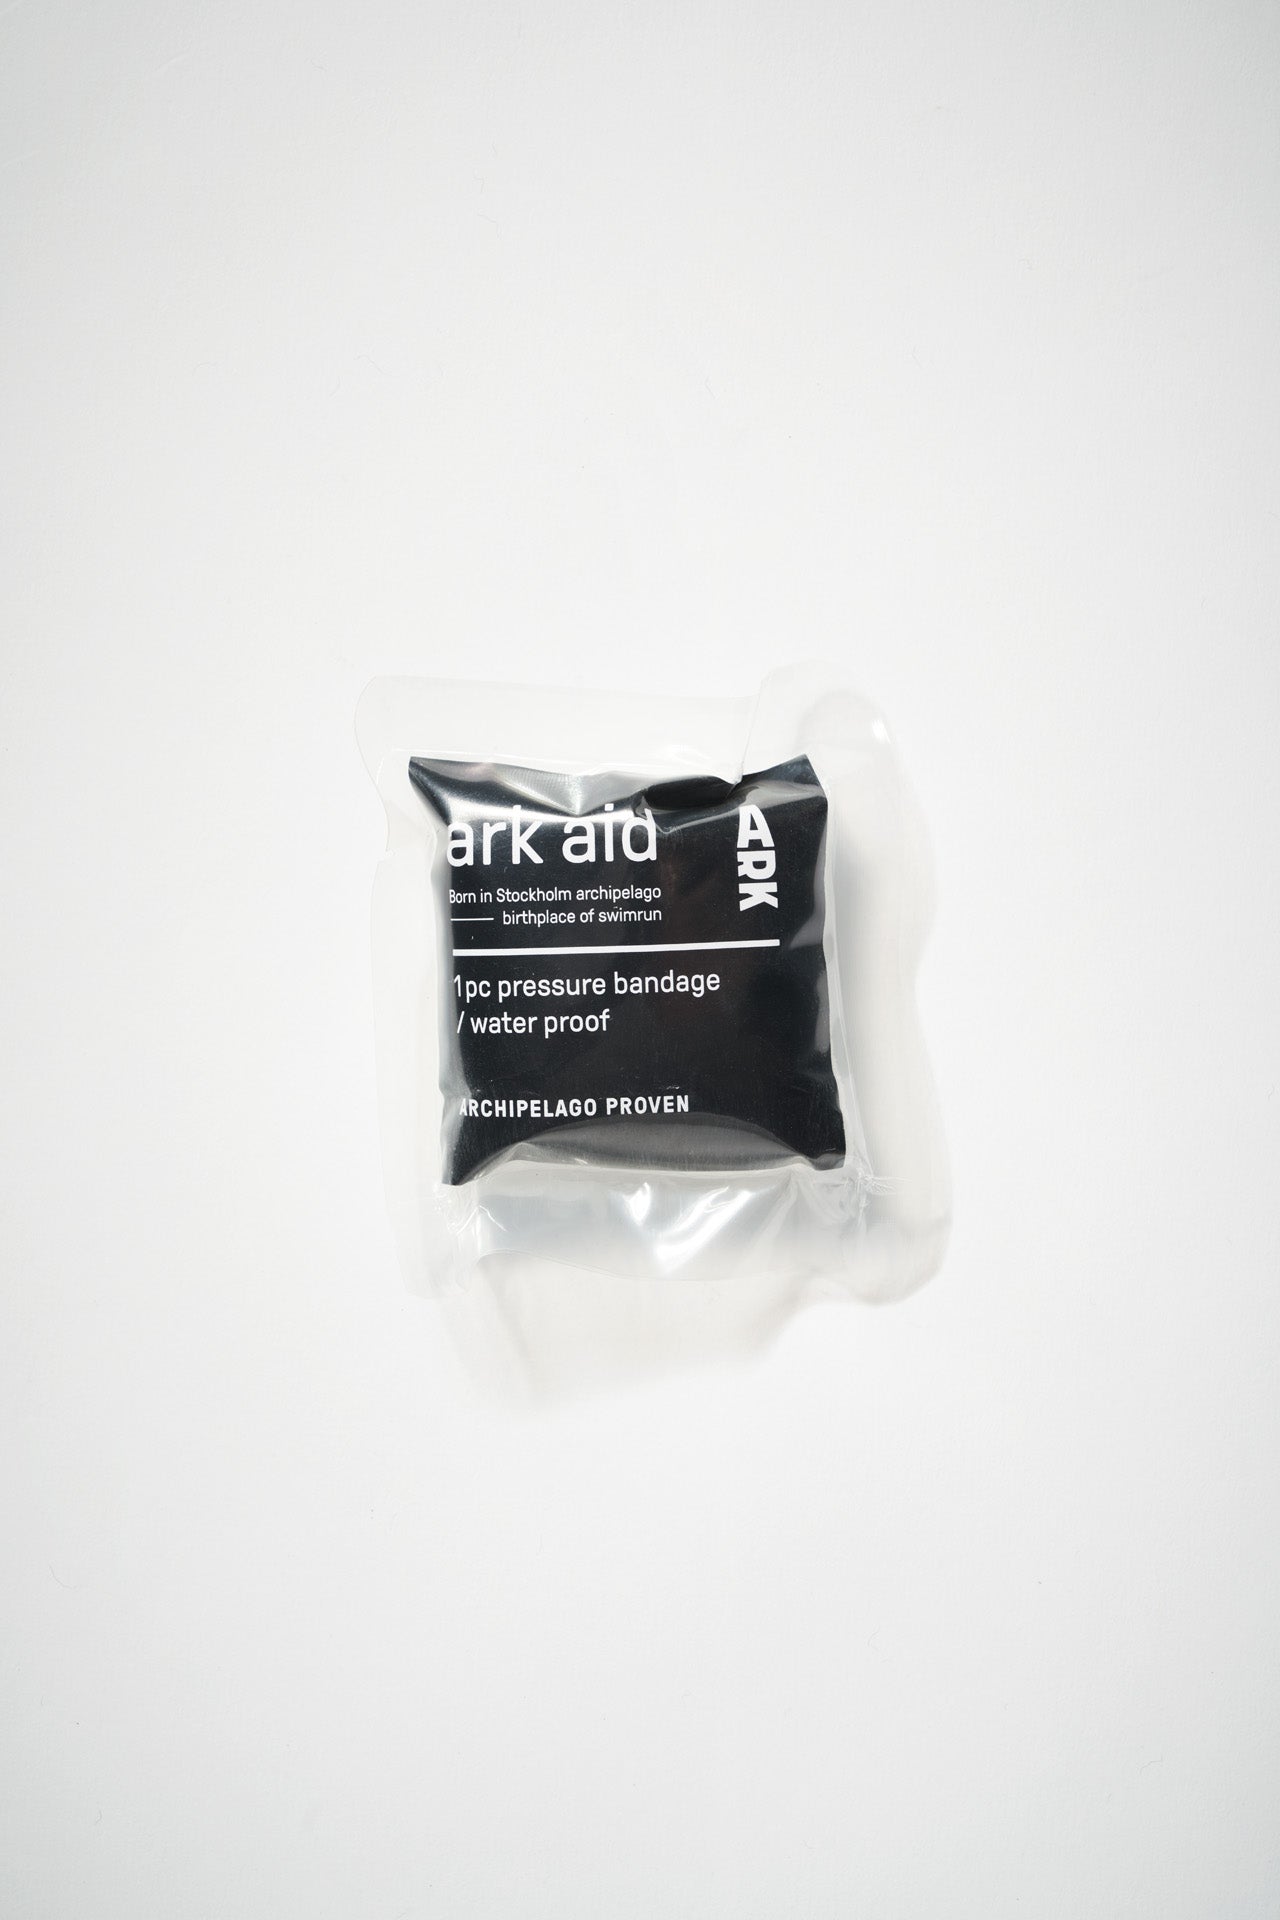 Product photo of ARK Aid